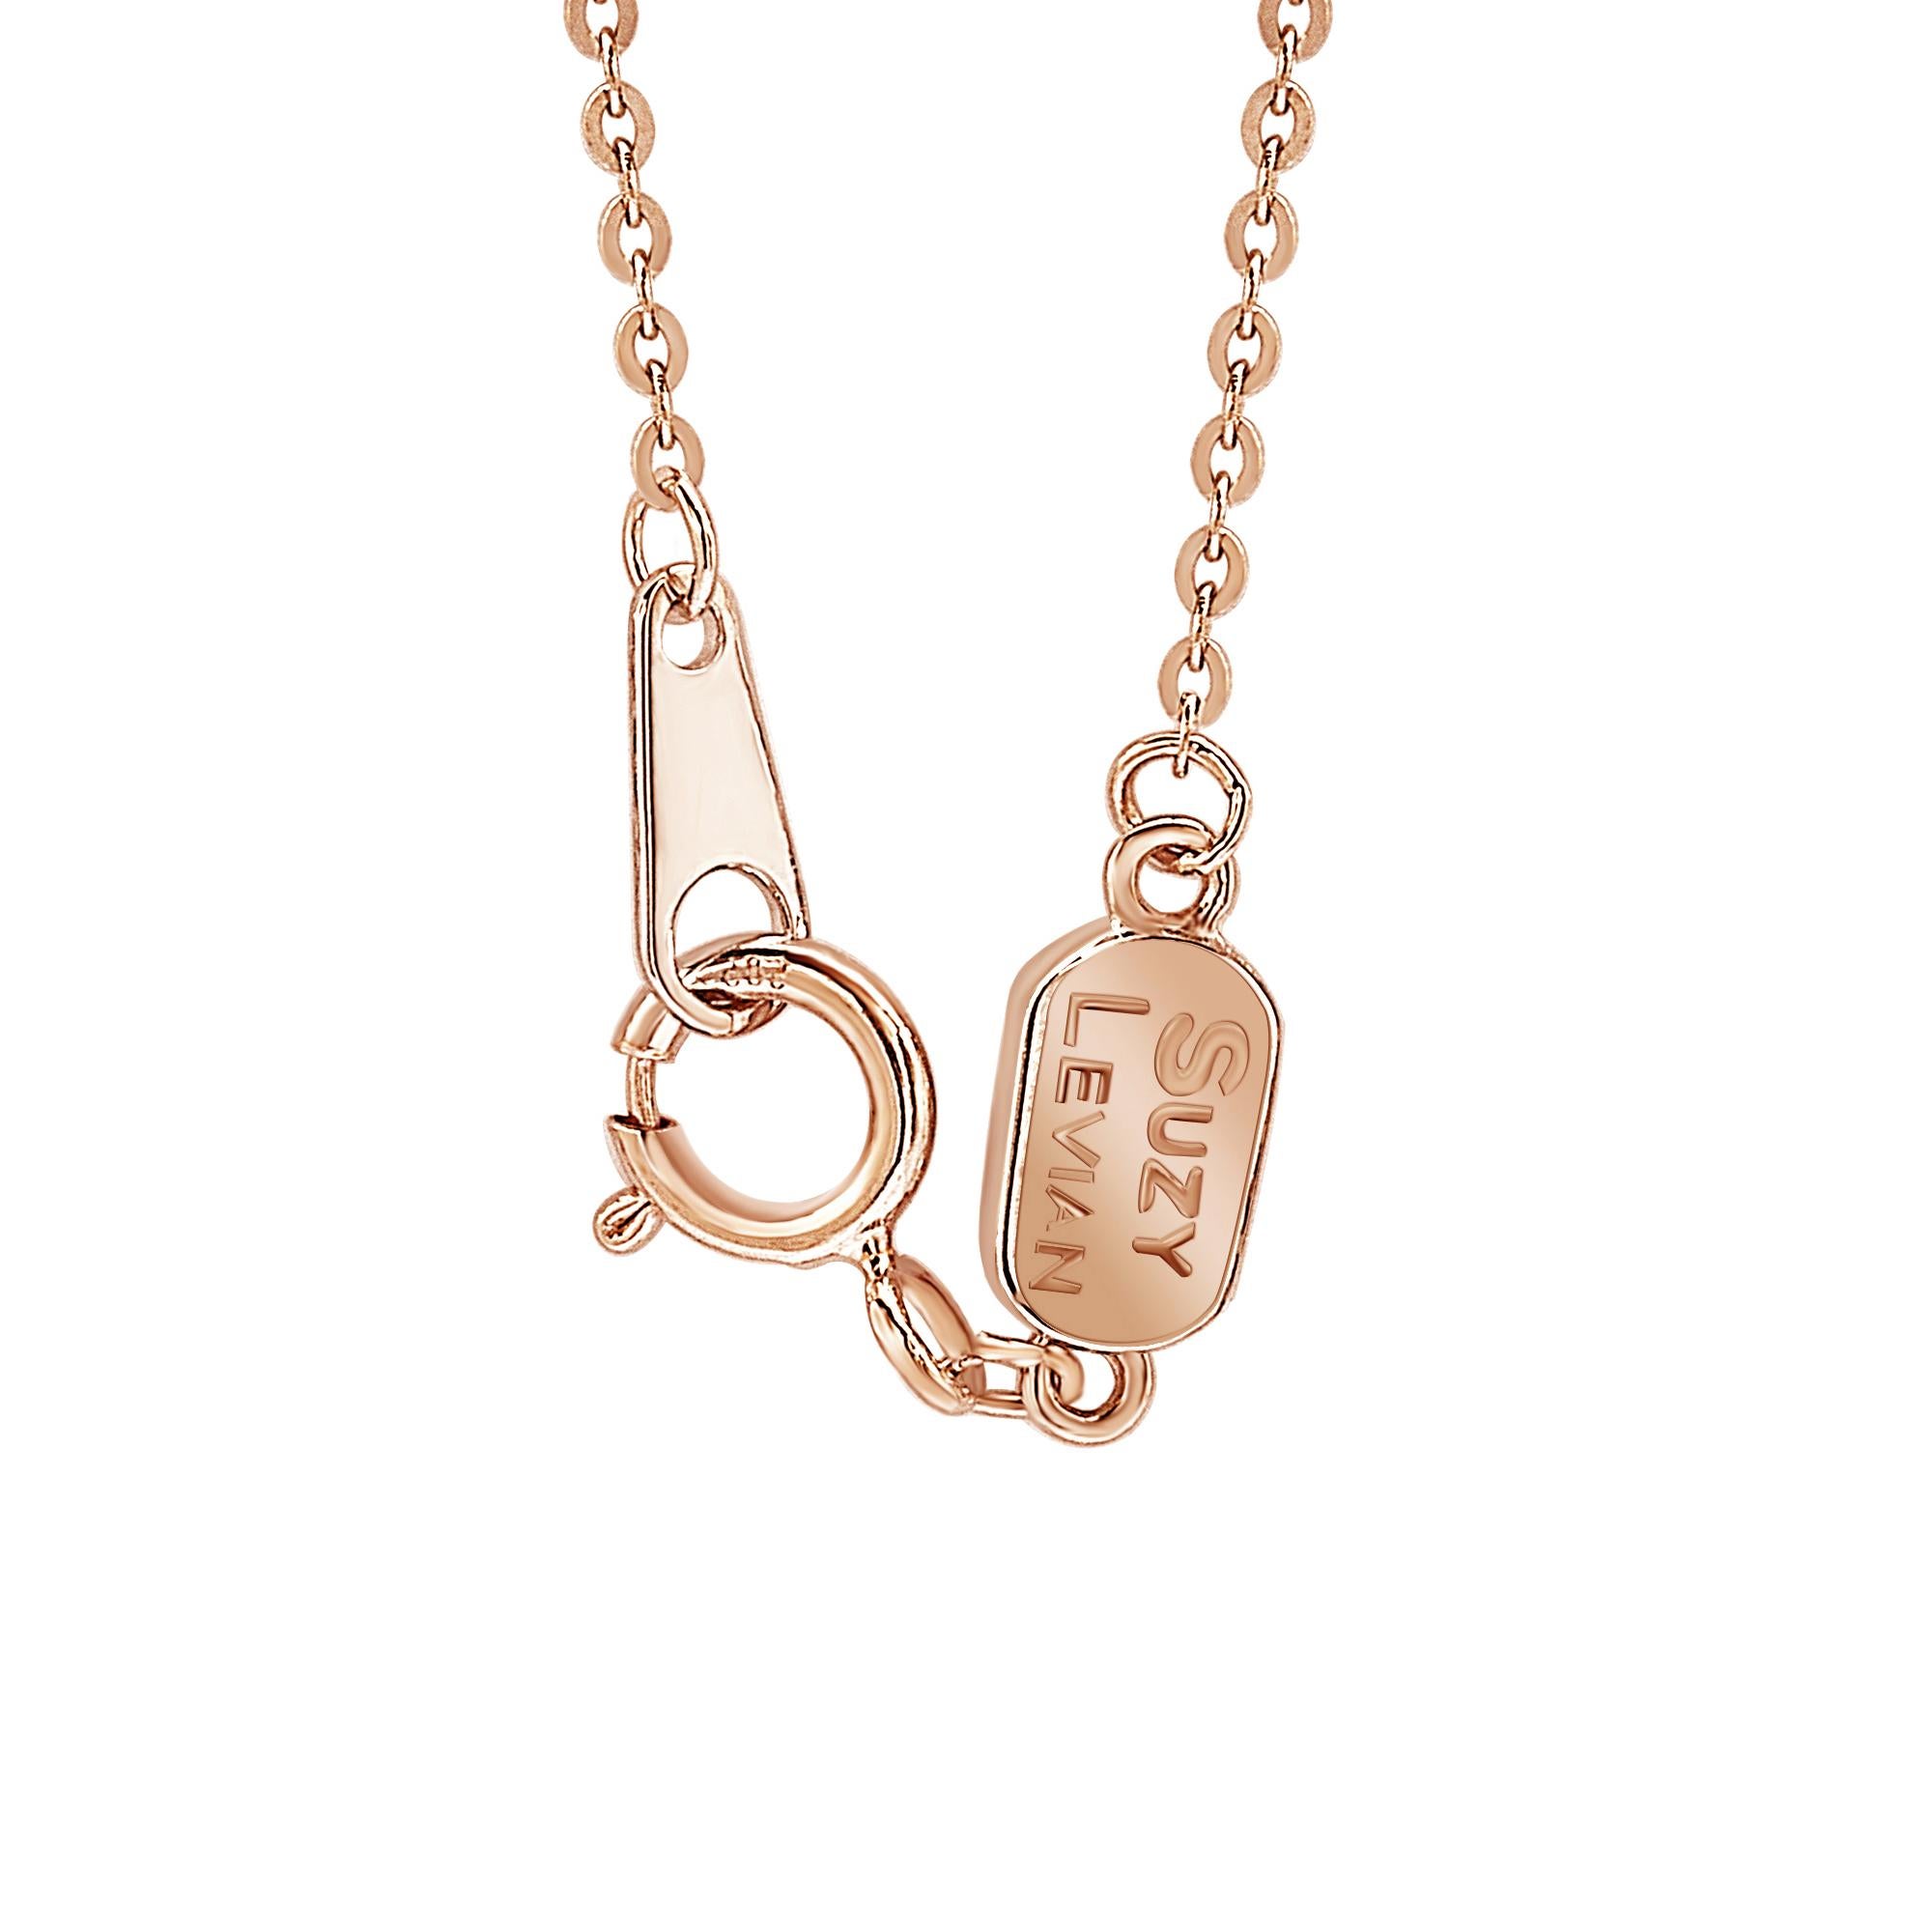 Contemporary Suzy Levian 14K Rose Gold 1.33 Carat White Diamond Station Necklace For Sale